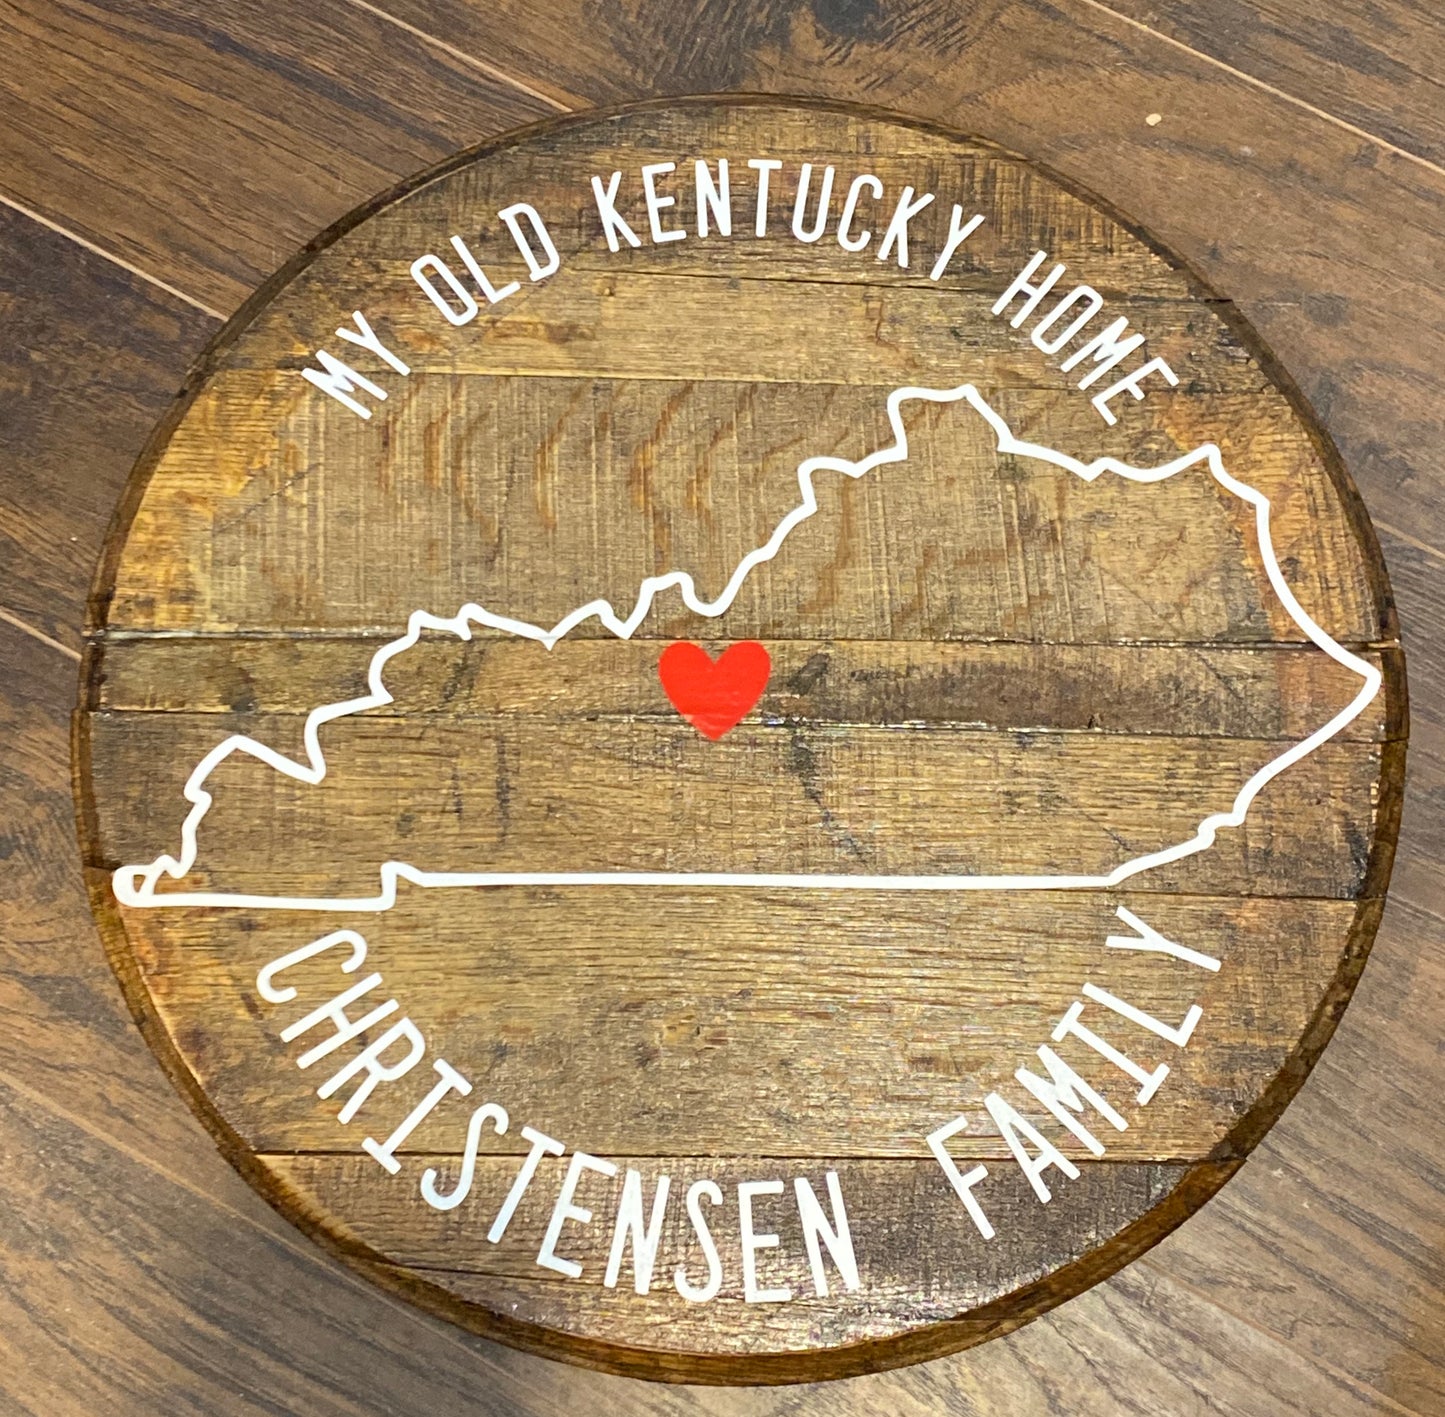 My old Ky Home - Bourbon barrel wood round